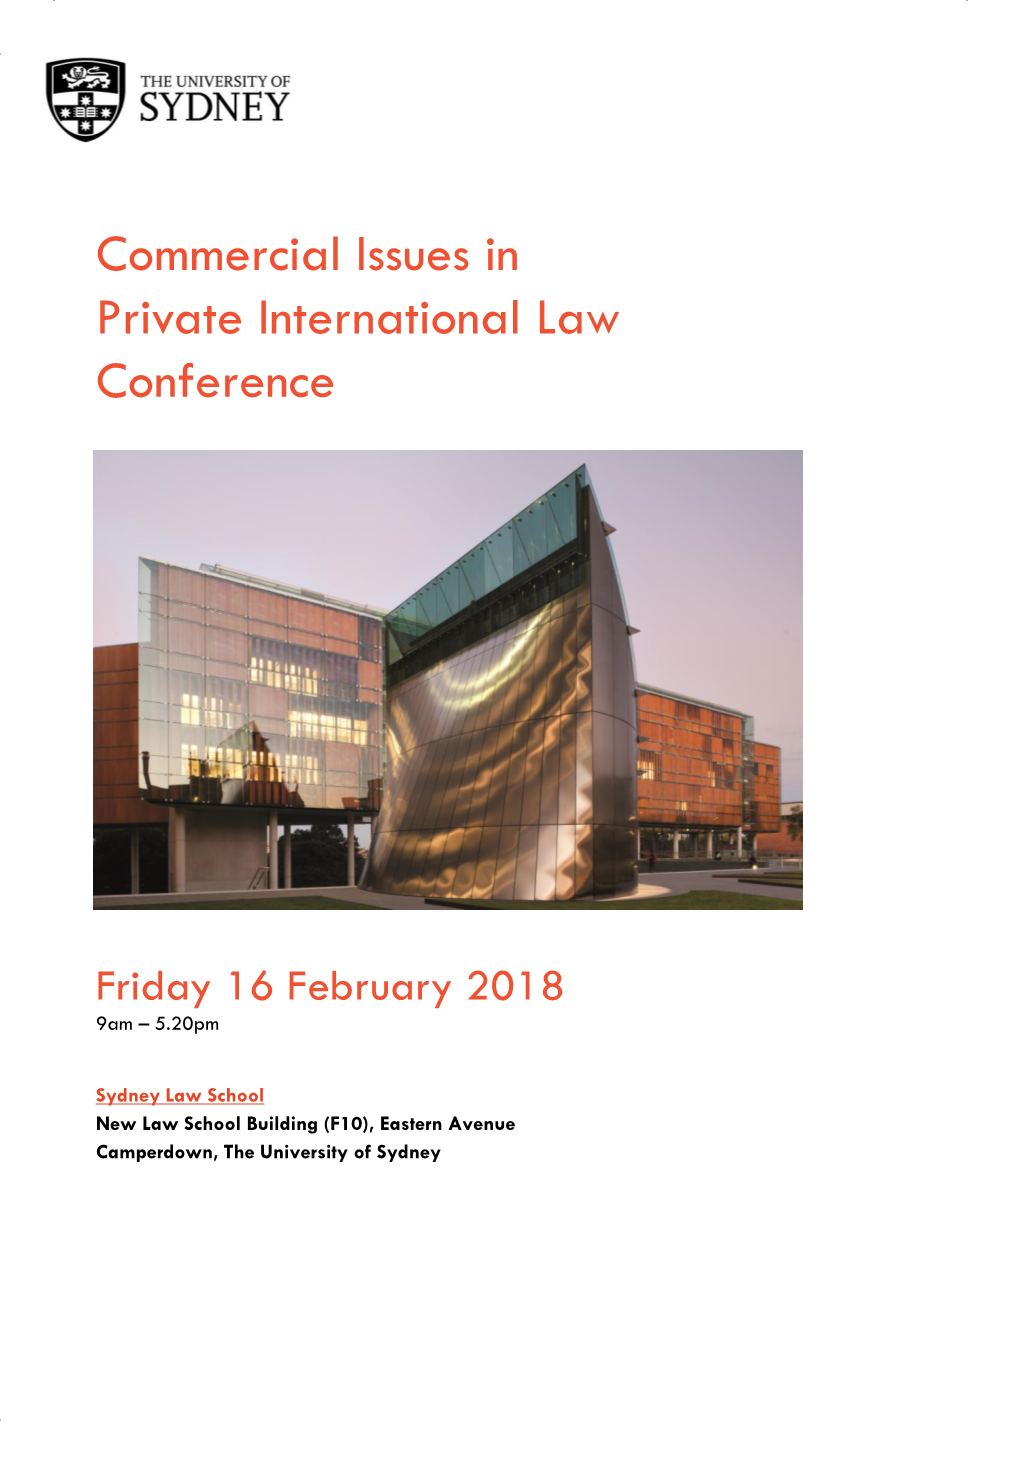 Commercial Issues in Private International Law Conference